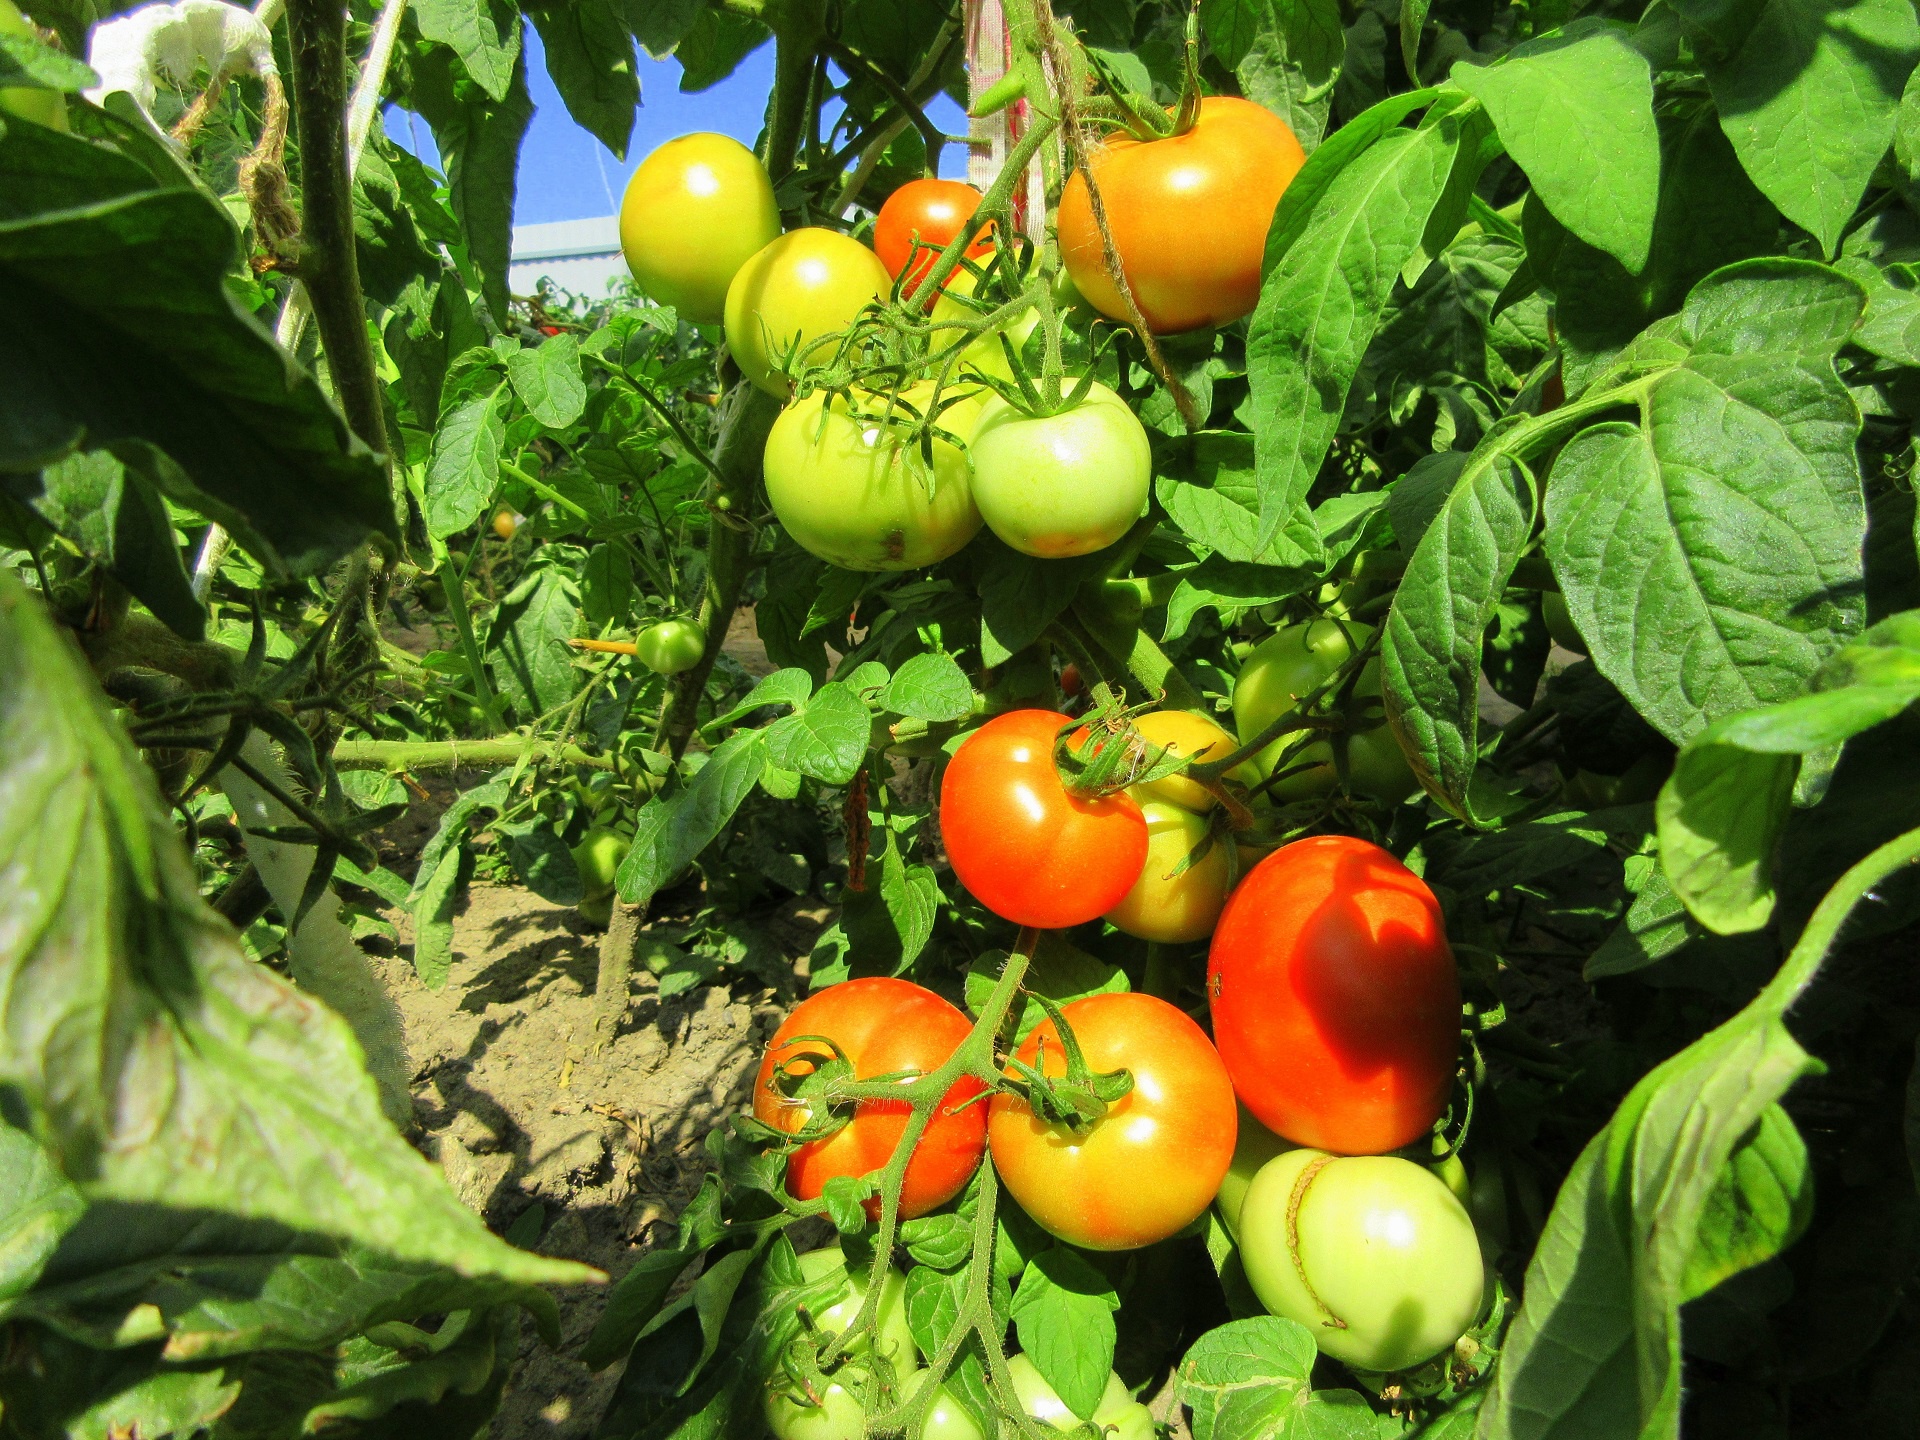 Are fruit tomatoes. Томат обыкновенный. Плод томата. Плод томата обыкновенного. Томаты на грядке.